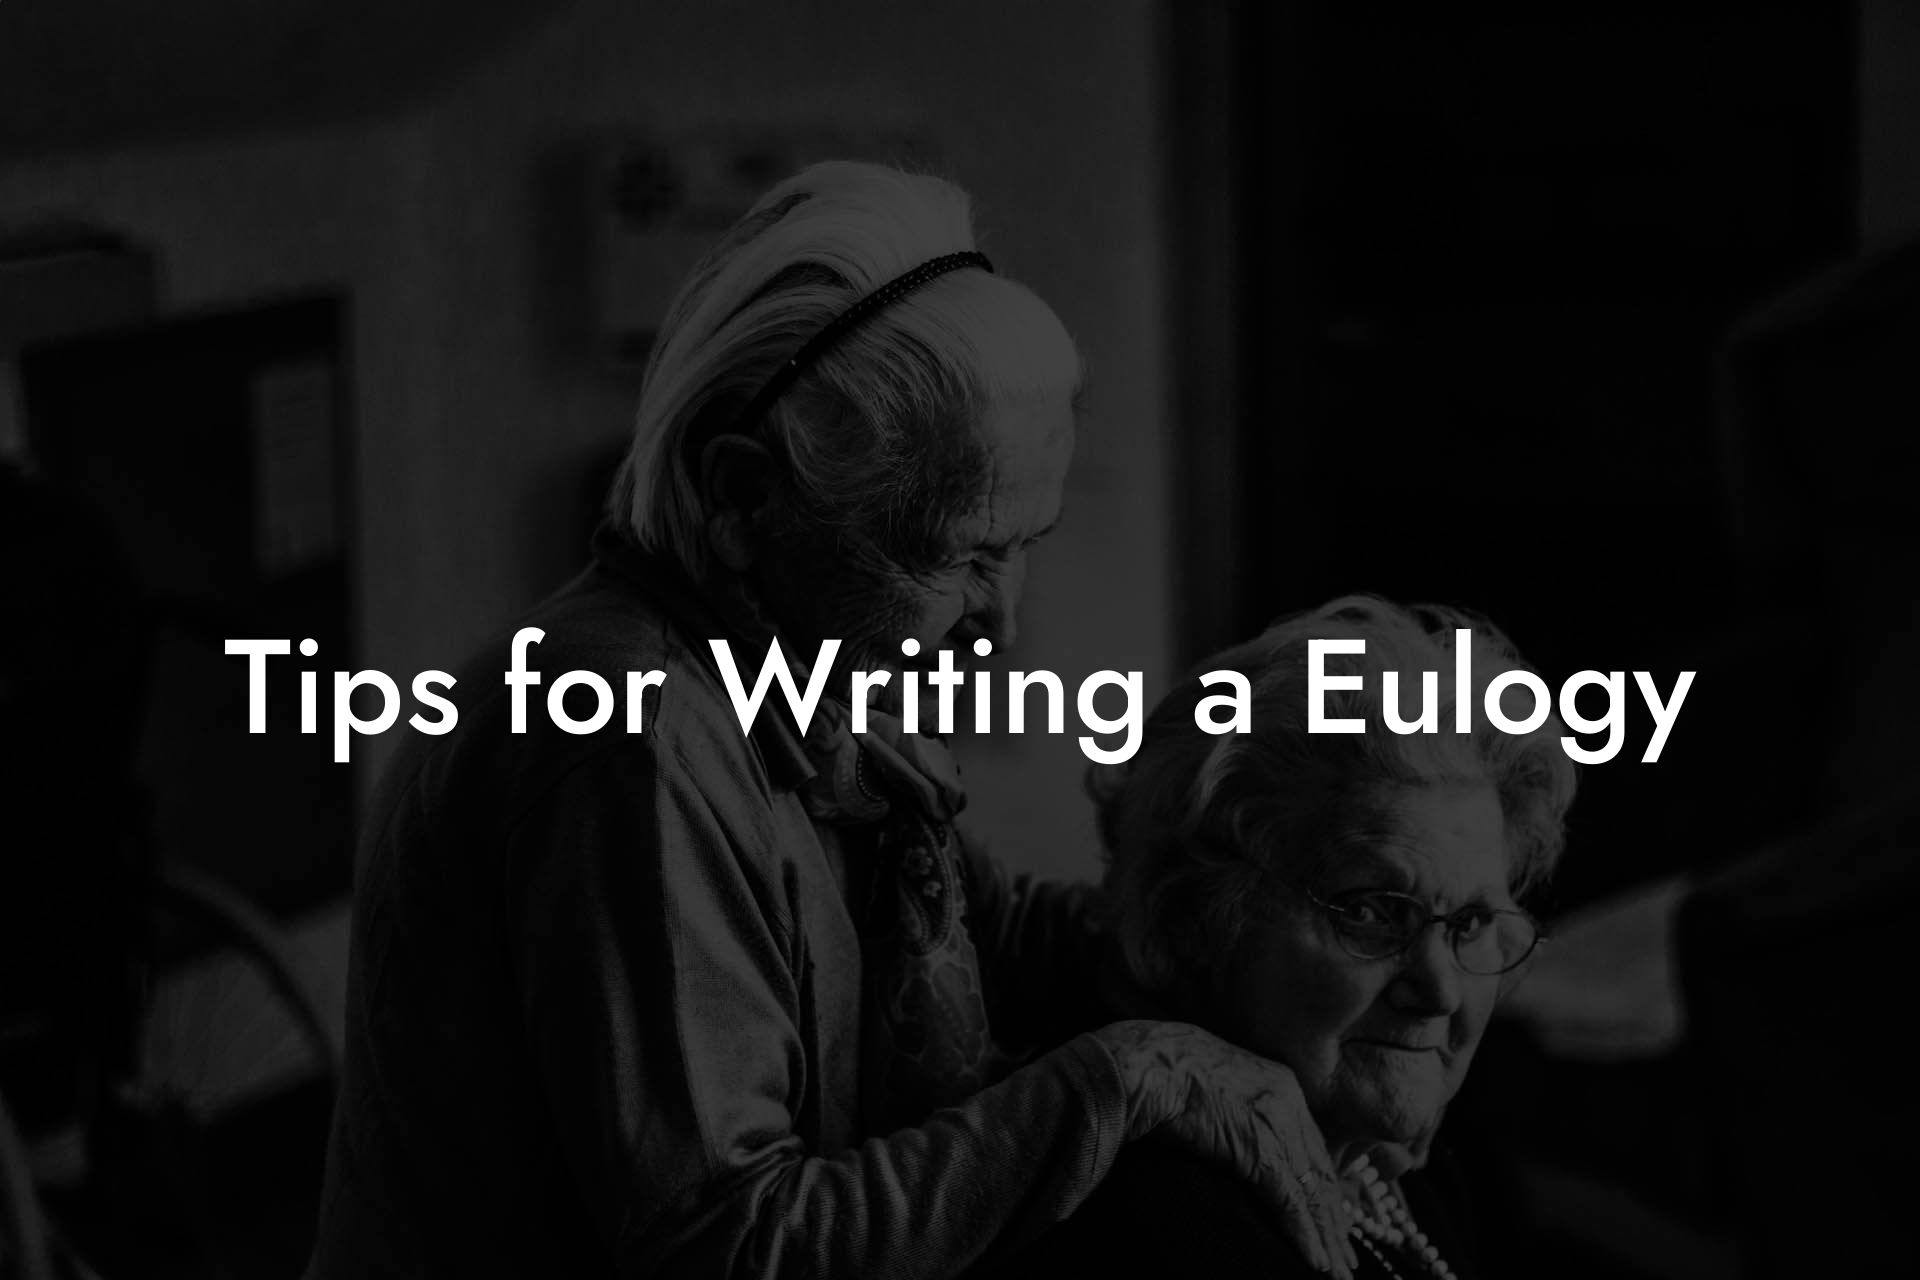 Tips for Writing a Eulogy